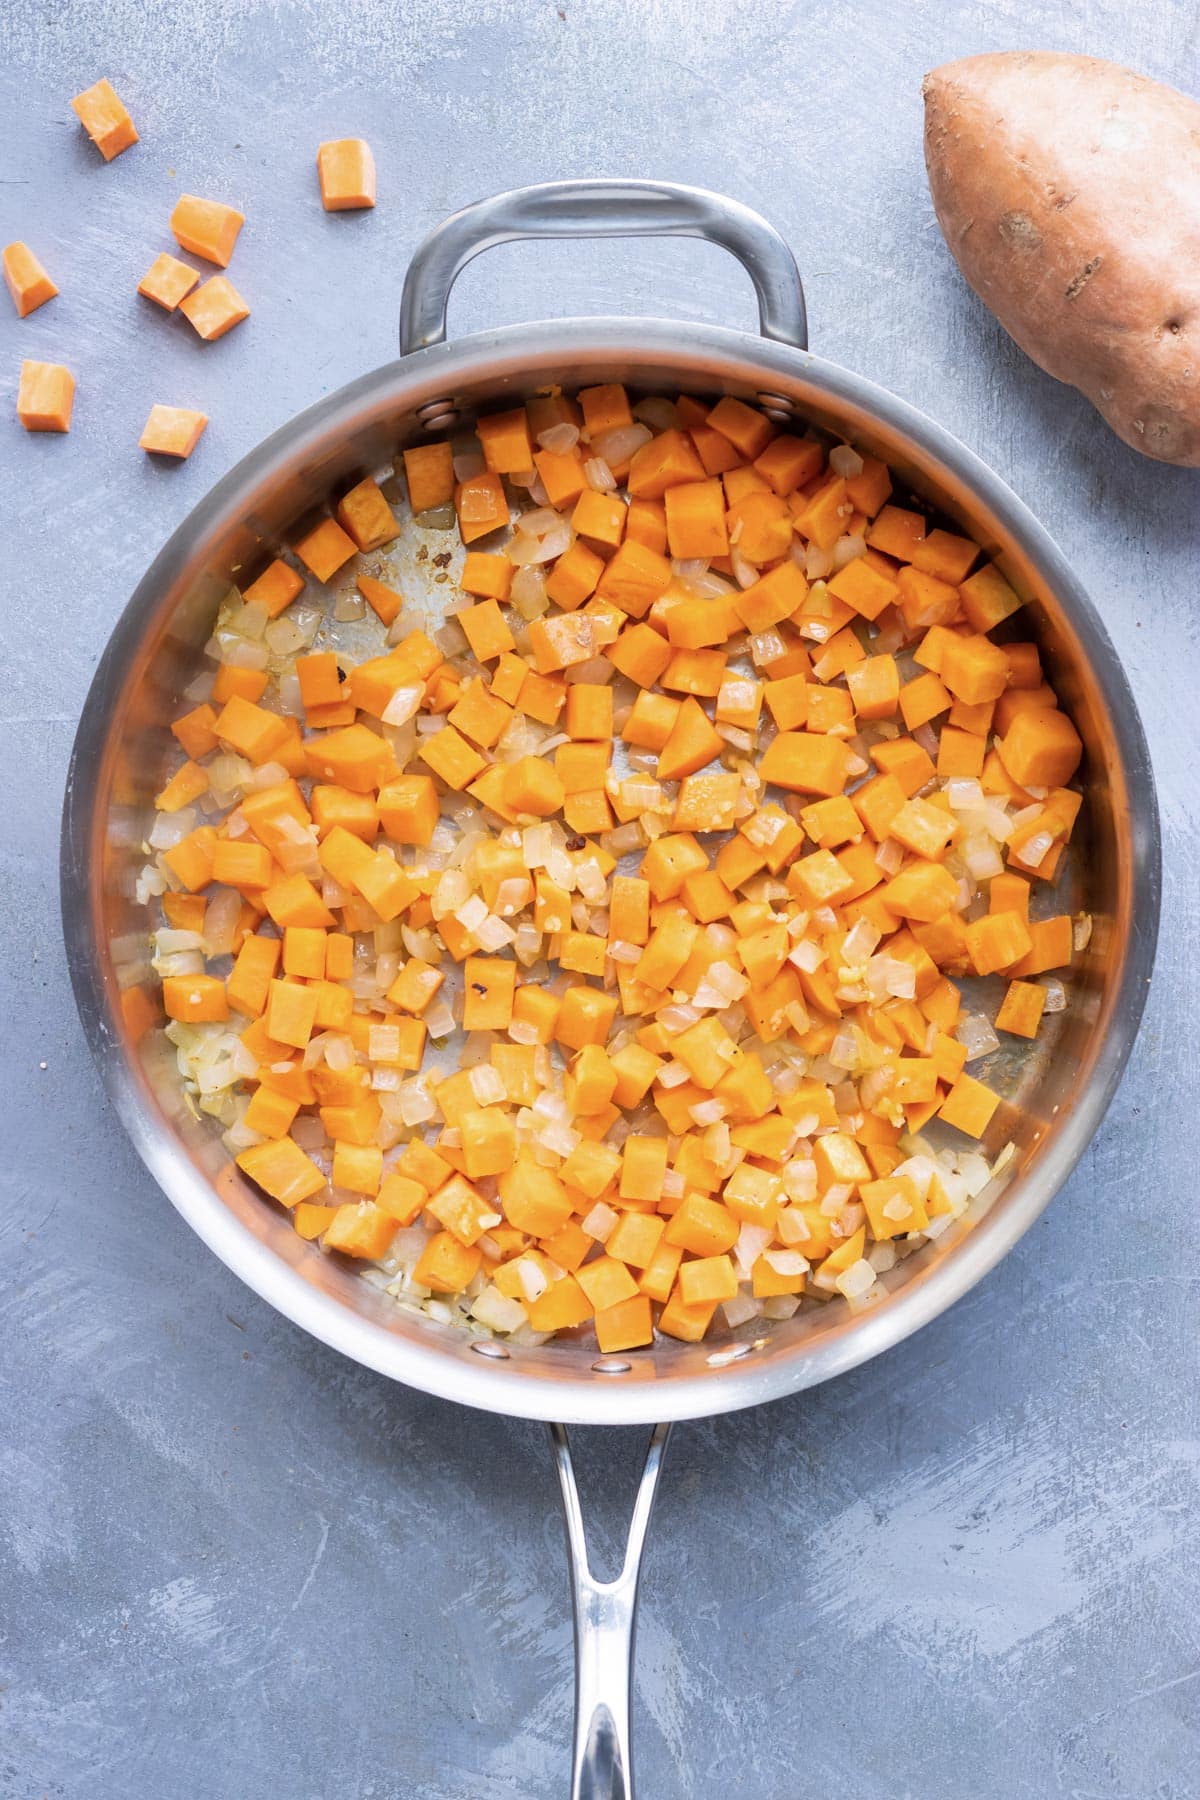 Sweet potatoes are cooked in a skillet.